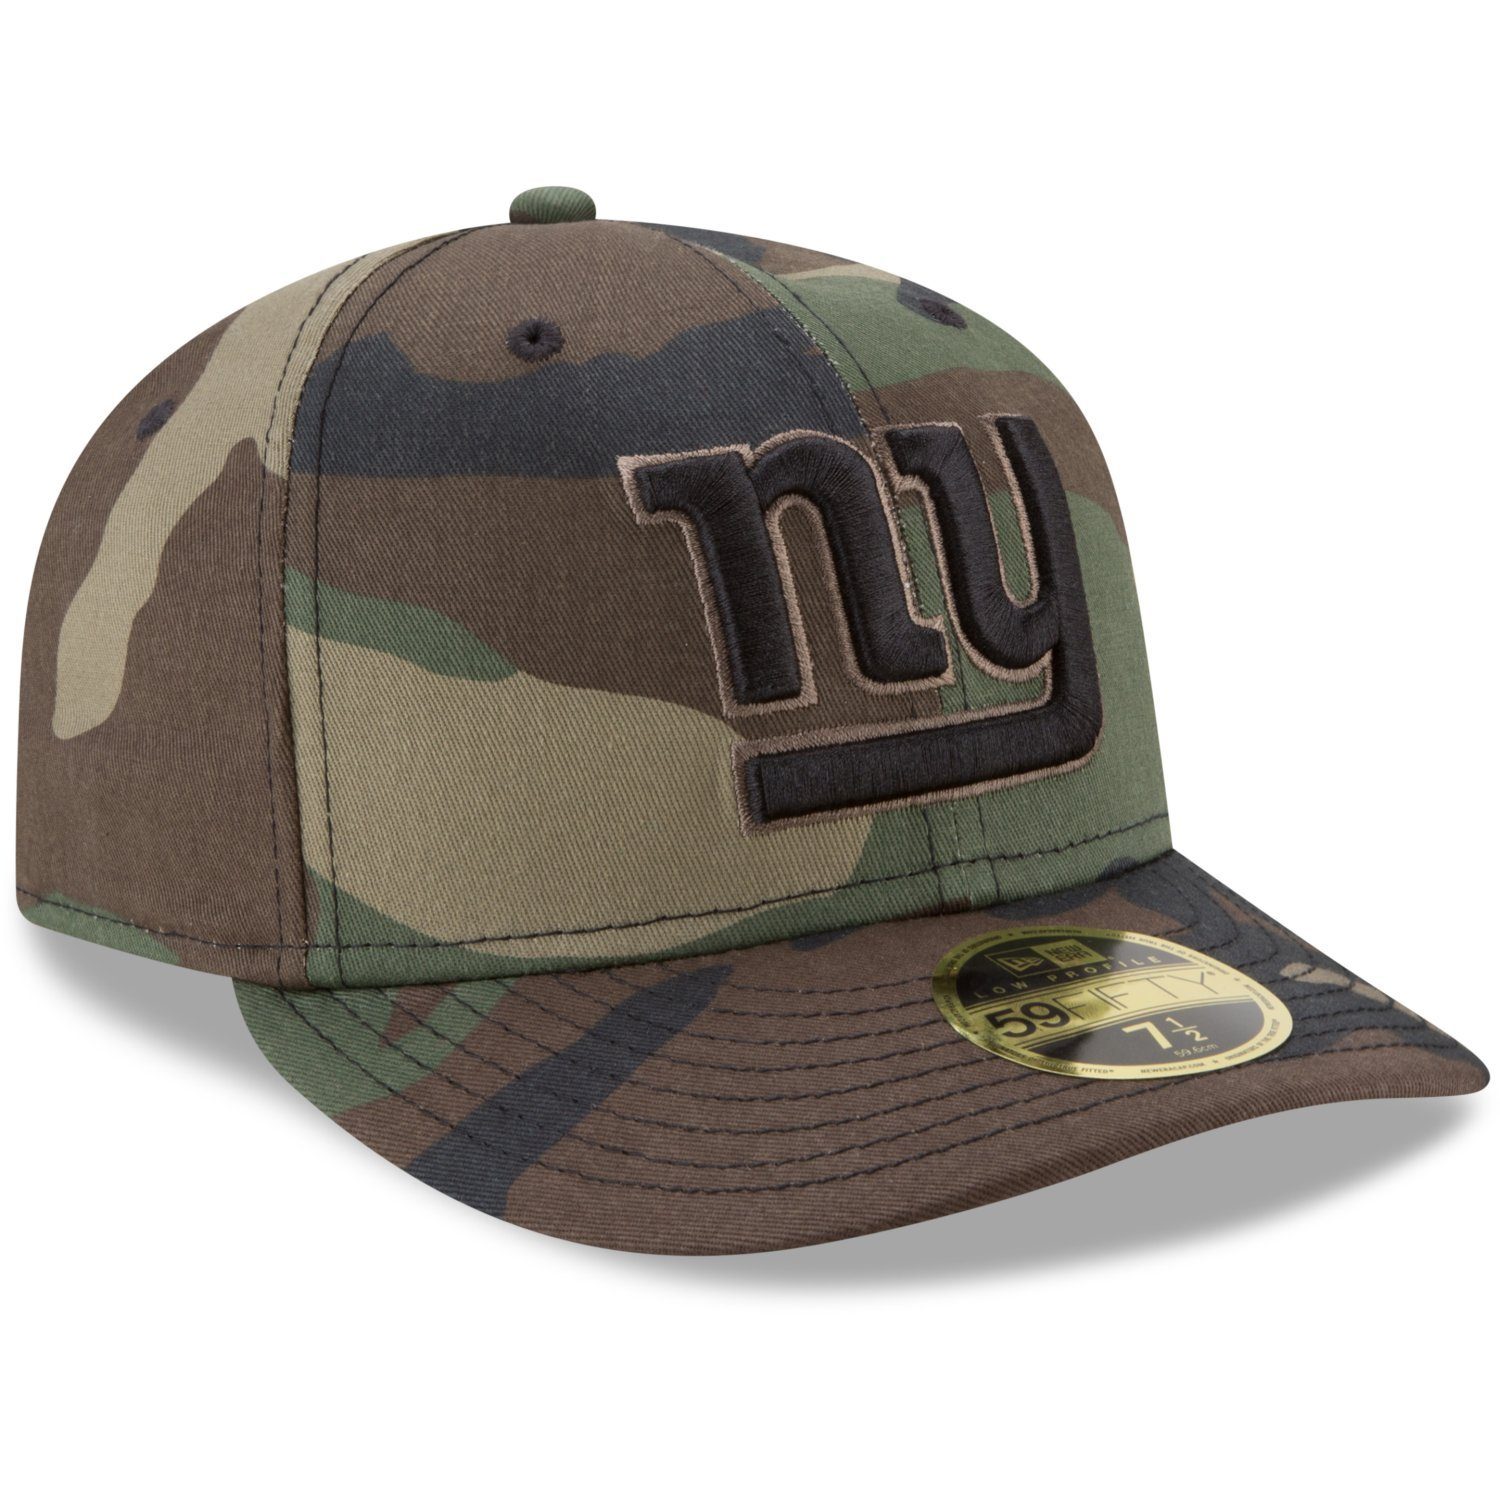 New Era 59Fifty NFL Low Teams Giants Cap Fitted Profile York New woodland